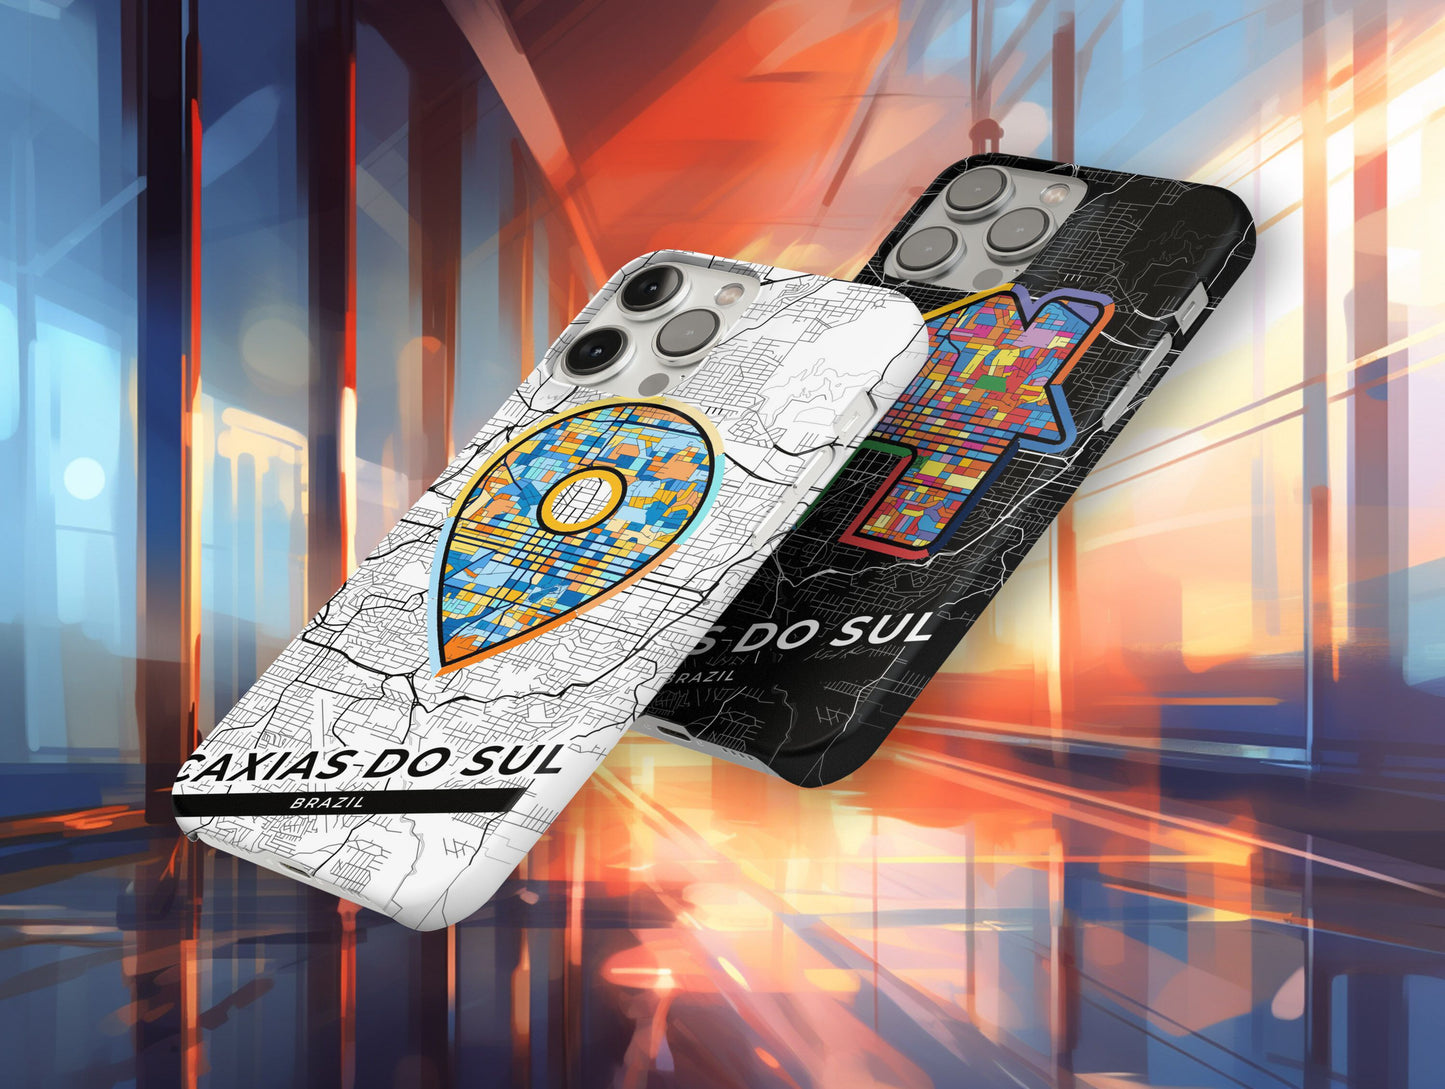 Caxias Do Sul Brazil slim phone case with colorful icon. Birthday, wedding or housewarming gift. Couple match cases.